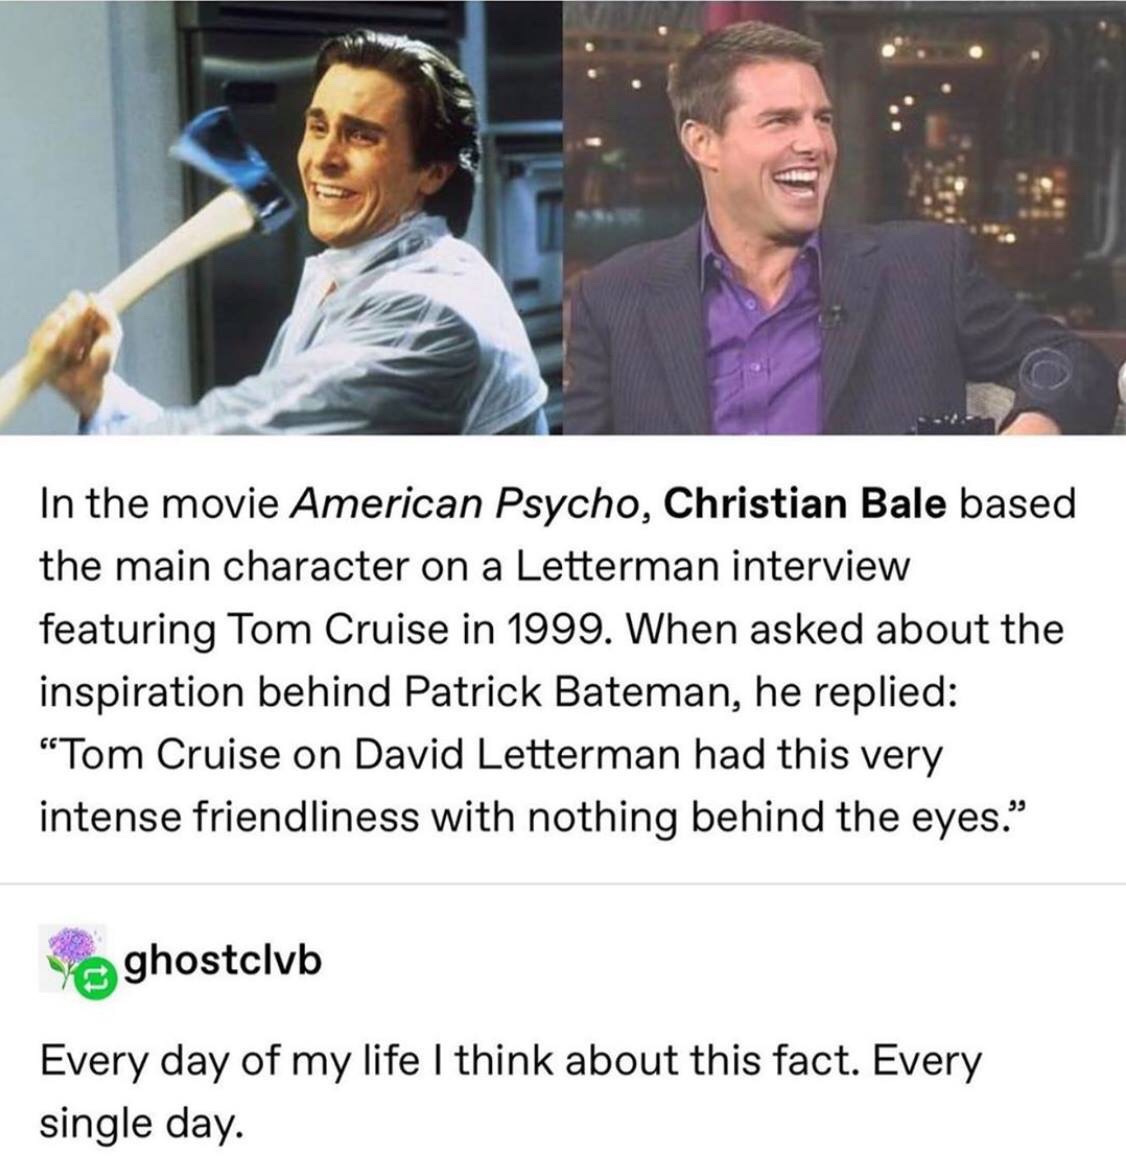 christian bale american psycho tom cruise - In the movie American Psycho, Christian Bale based the main character on a Letterman interview featuring Tom Cruise in 1999. When asked about the inspiration behind Patrick Bateman, he replied Tom Cruise on Davi